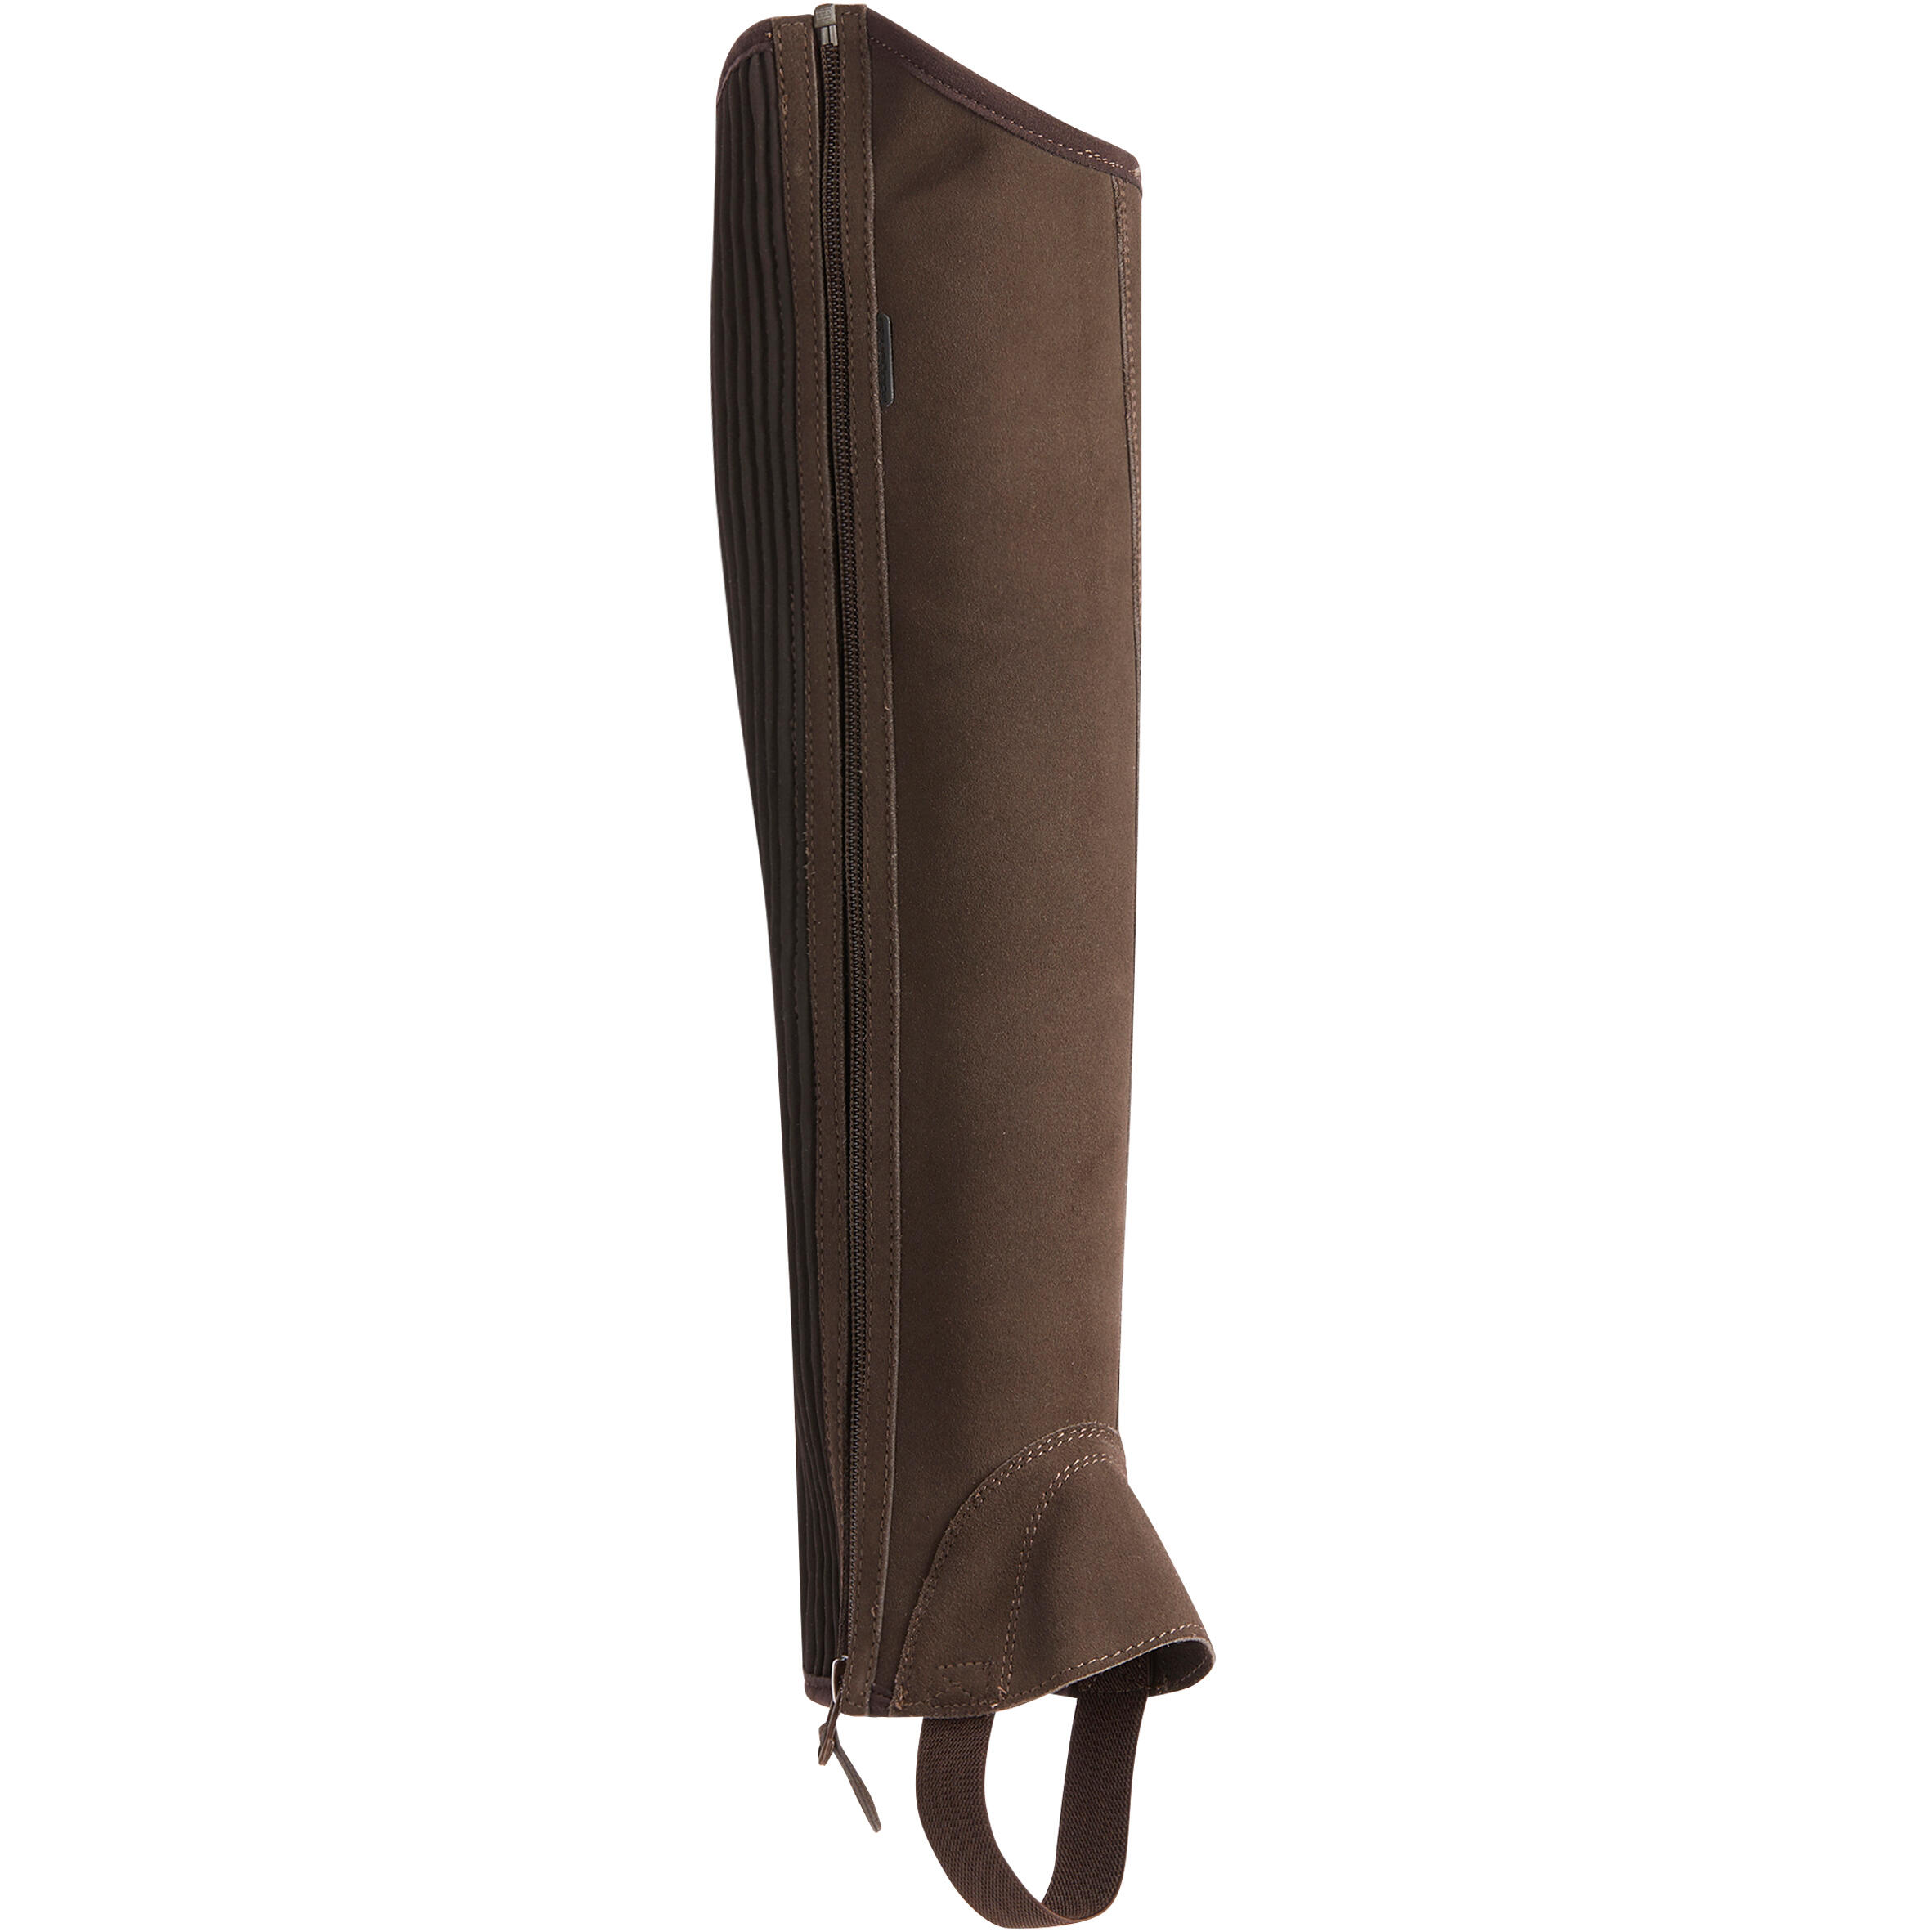 Sentier Adult Horse Riding Gusseted Half-Chaps - Brown 1/12